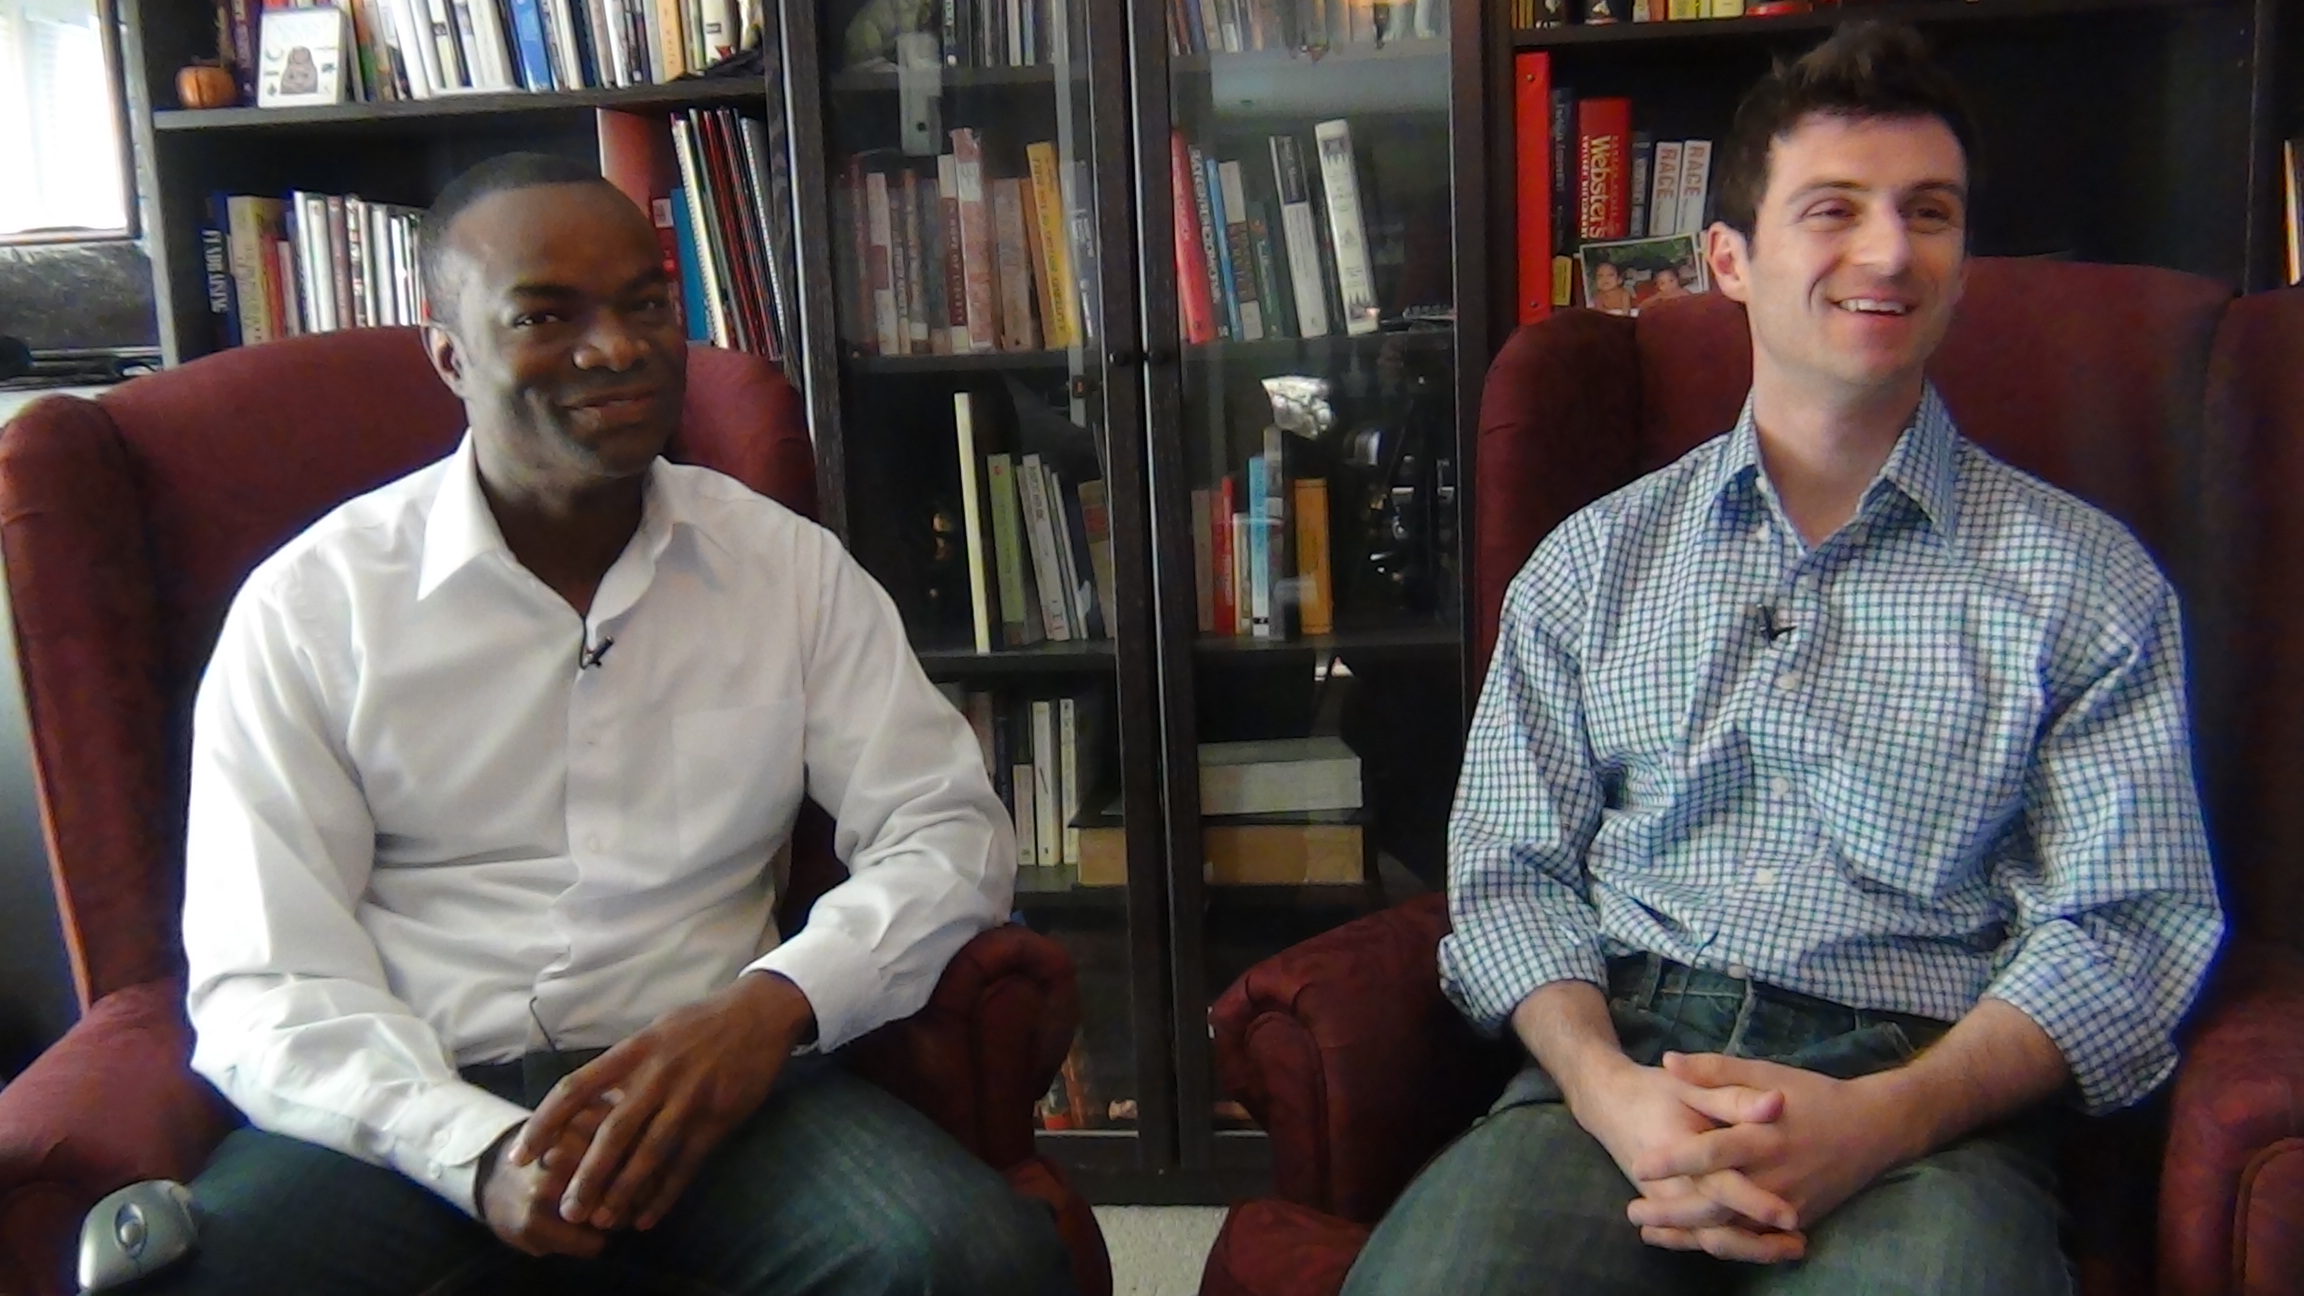 Eric Dobson and Emilio Panasci of Open Communities tape their diversity training DVD